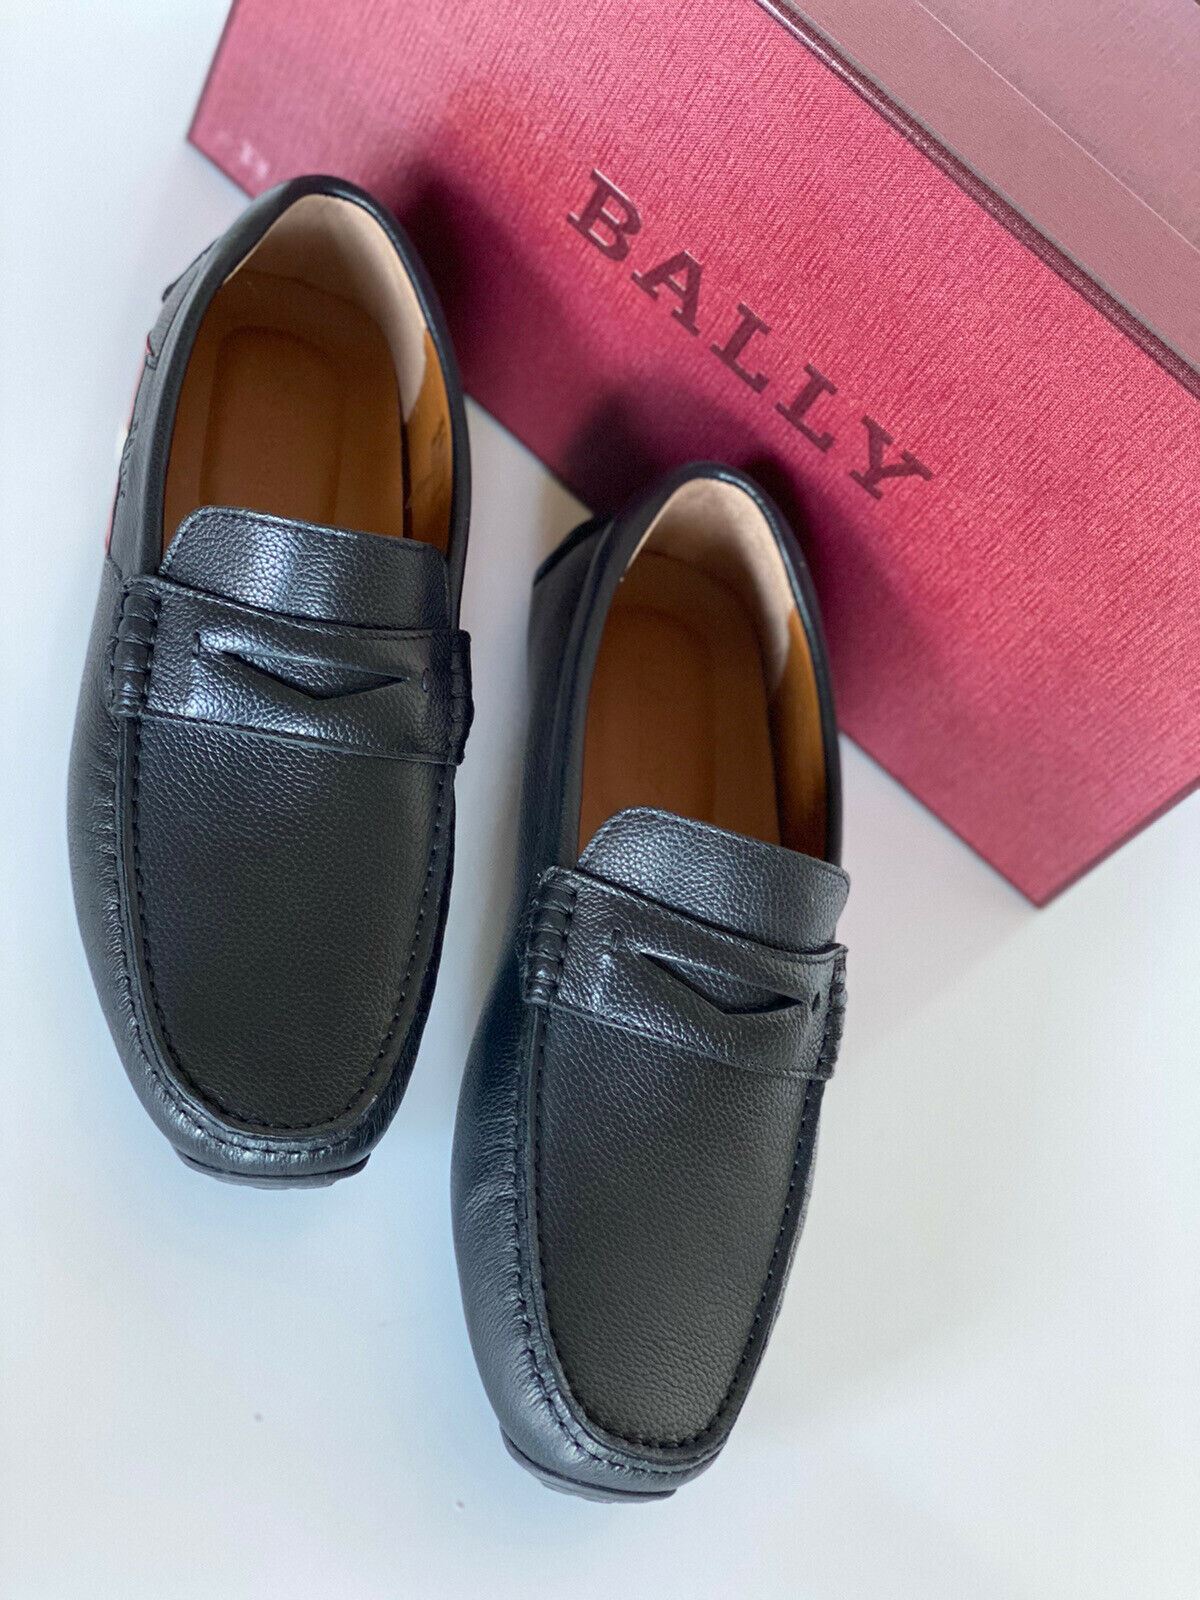 NIB Bally Mens Bovine Grained Leather Driver Loafers Shoes Black 8 US IT 6233869